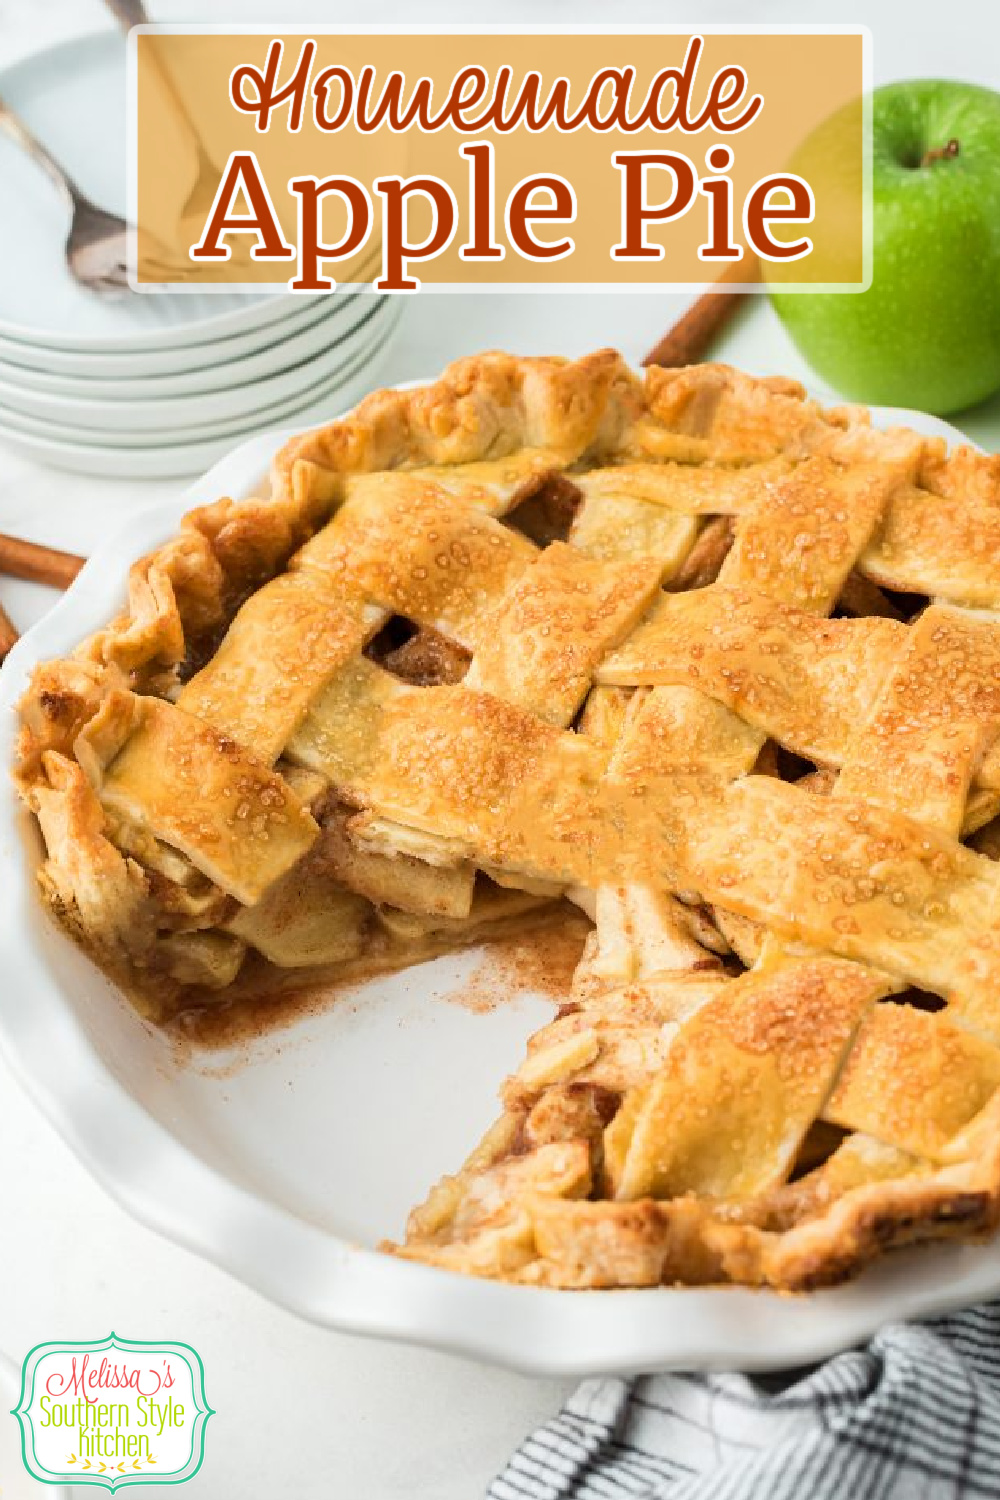 This lattice topped Apple Pie Recipe can be served warm with vanilla ice cream, at room temperature or chilled with a dollop of whipped cream #applepierecipe #applepie #grannysmithapples #bestapplepie #thanksgivingpies #desserts #easyapplepie via @melissasssk